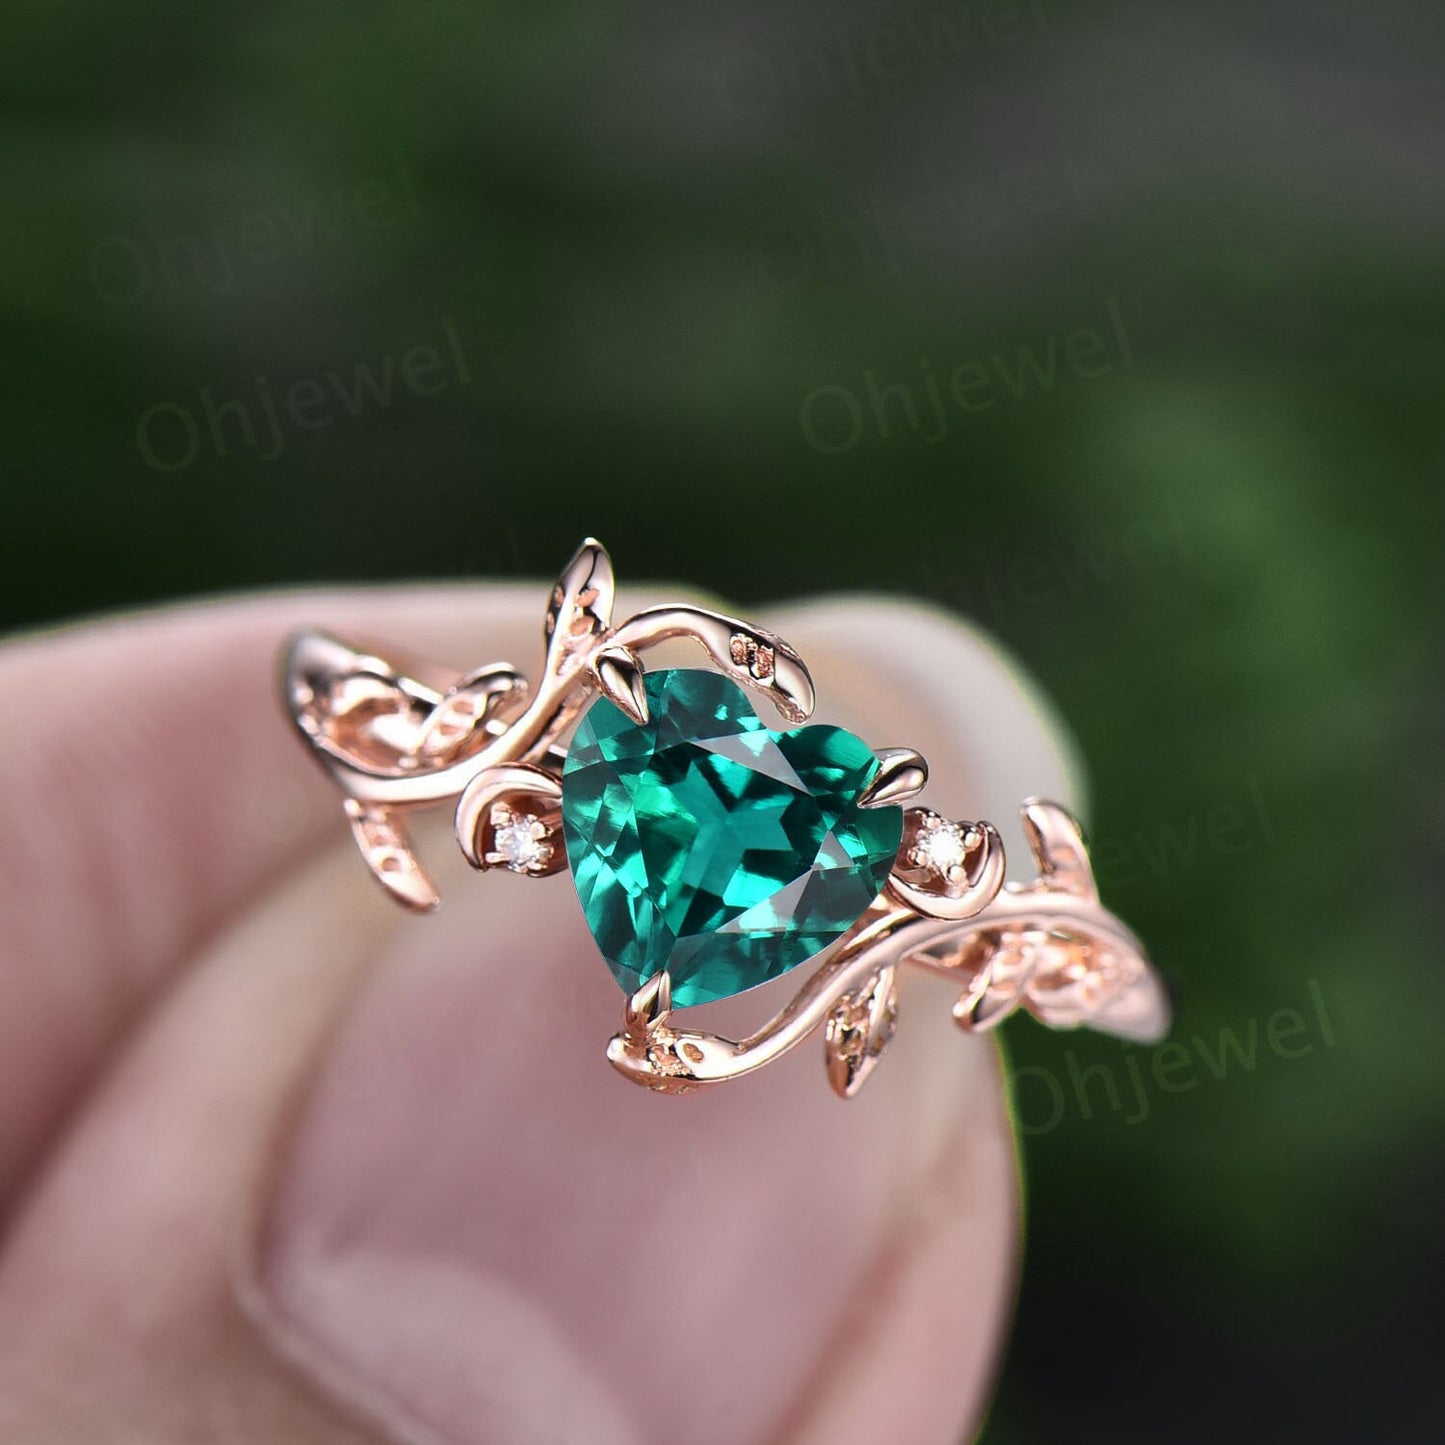 Vintage heart shaped green emerald engagement ring solid 14k rose gold three stone leaf moon diamond bridal wedding promise ring women gift